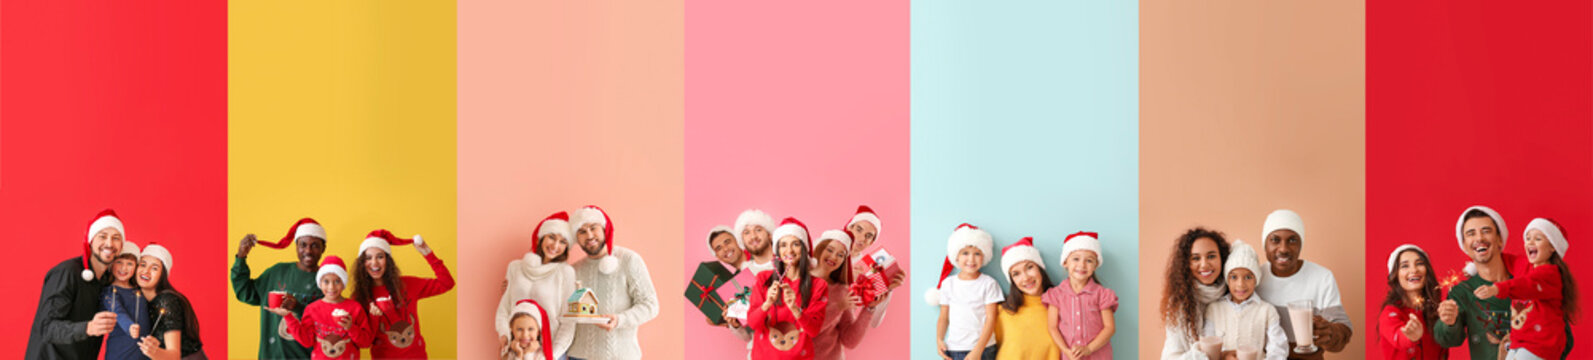 Group of happy people on color background. Happy New Year and Merry Christmas